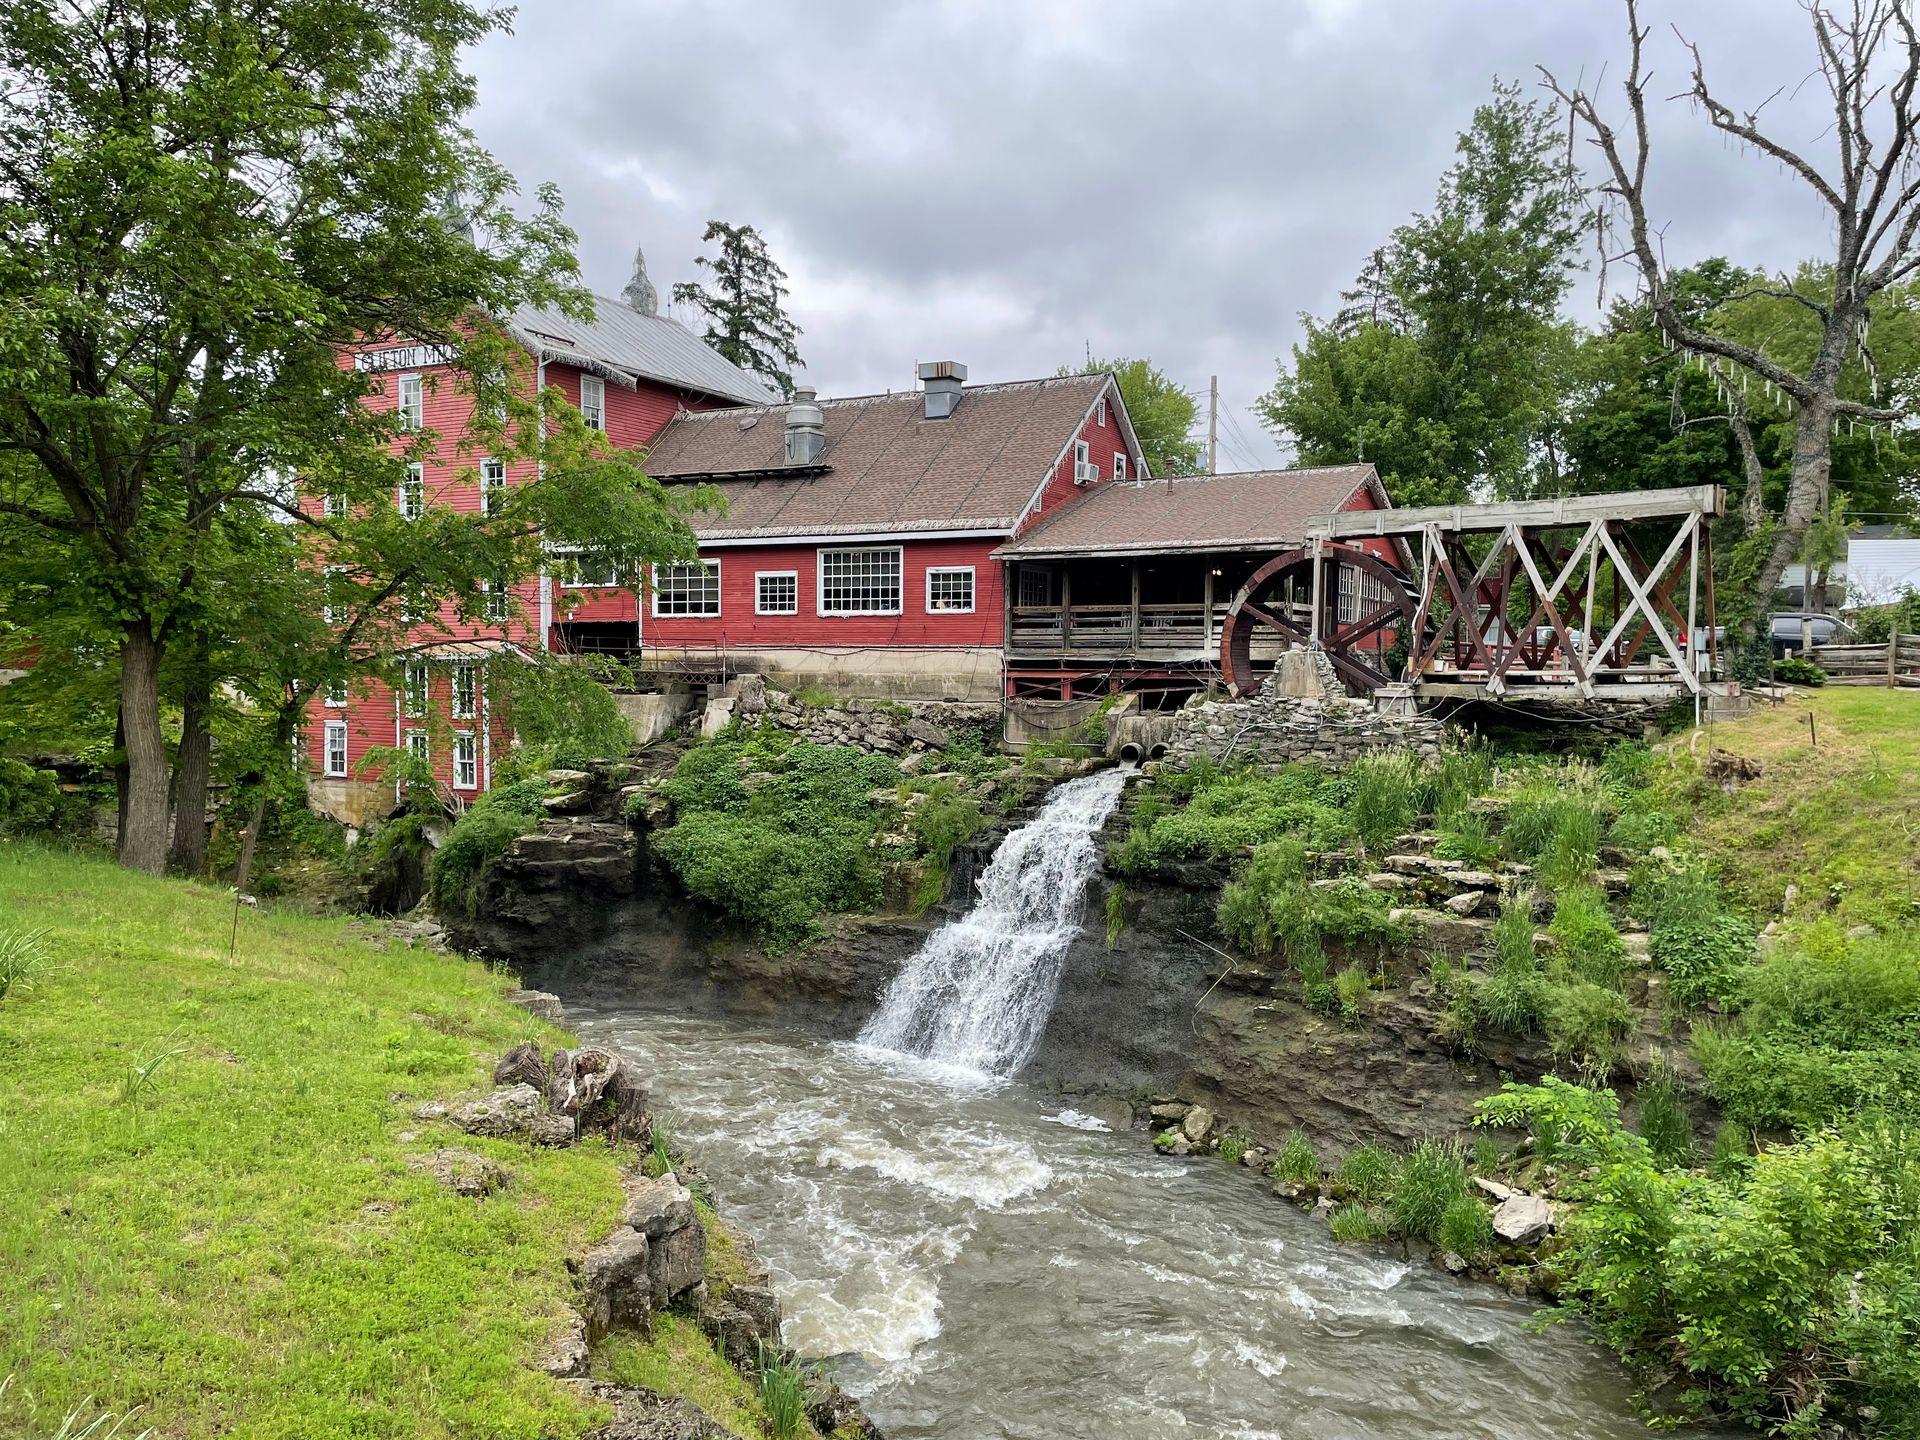 Looking at Clifton Mill. The building is red and has a water mill. Water flows down from the Mill and into a river.